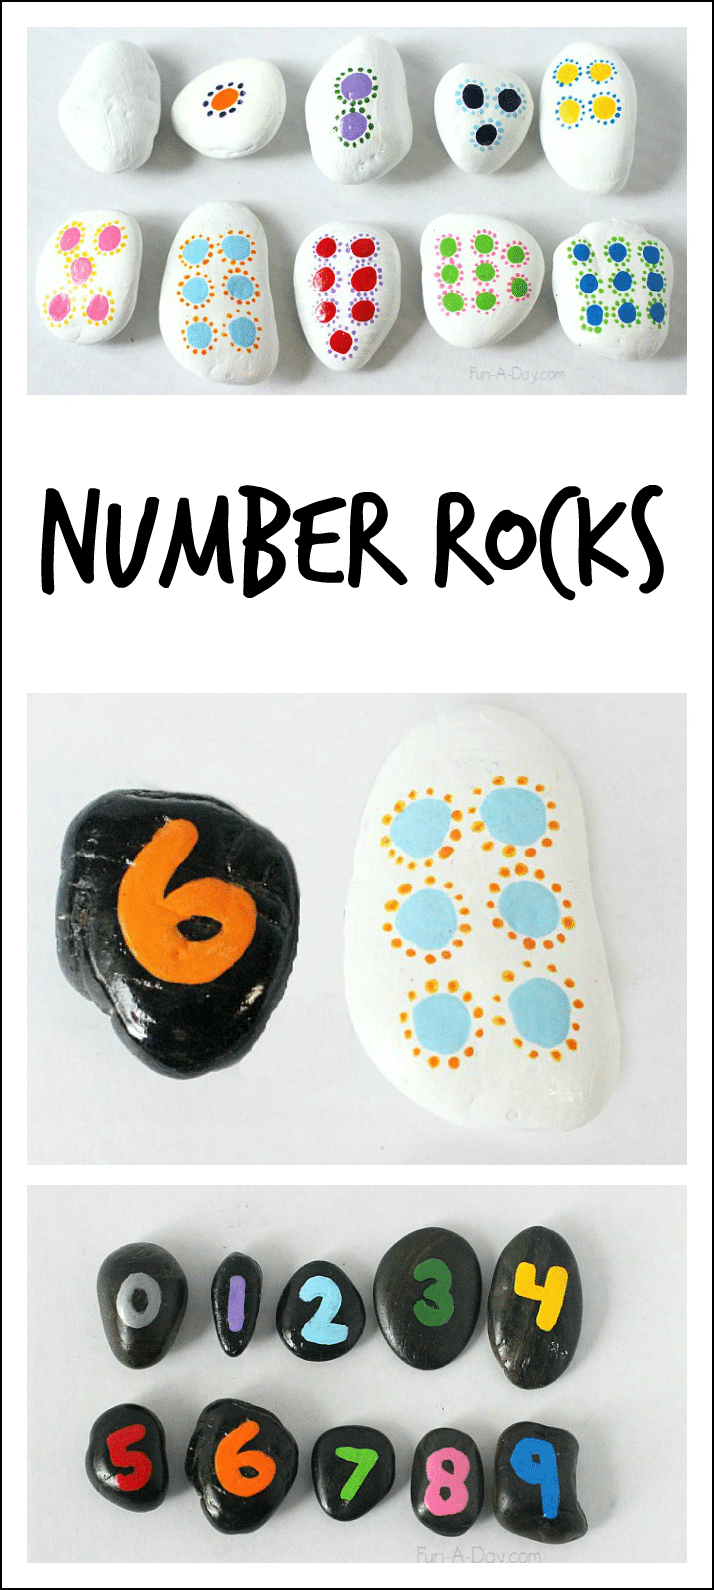 Hands-on math with homemade number rocks